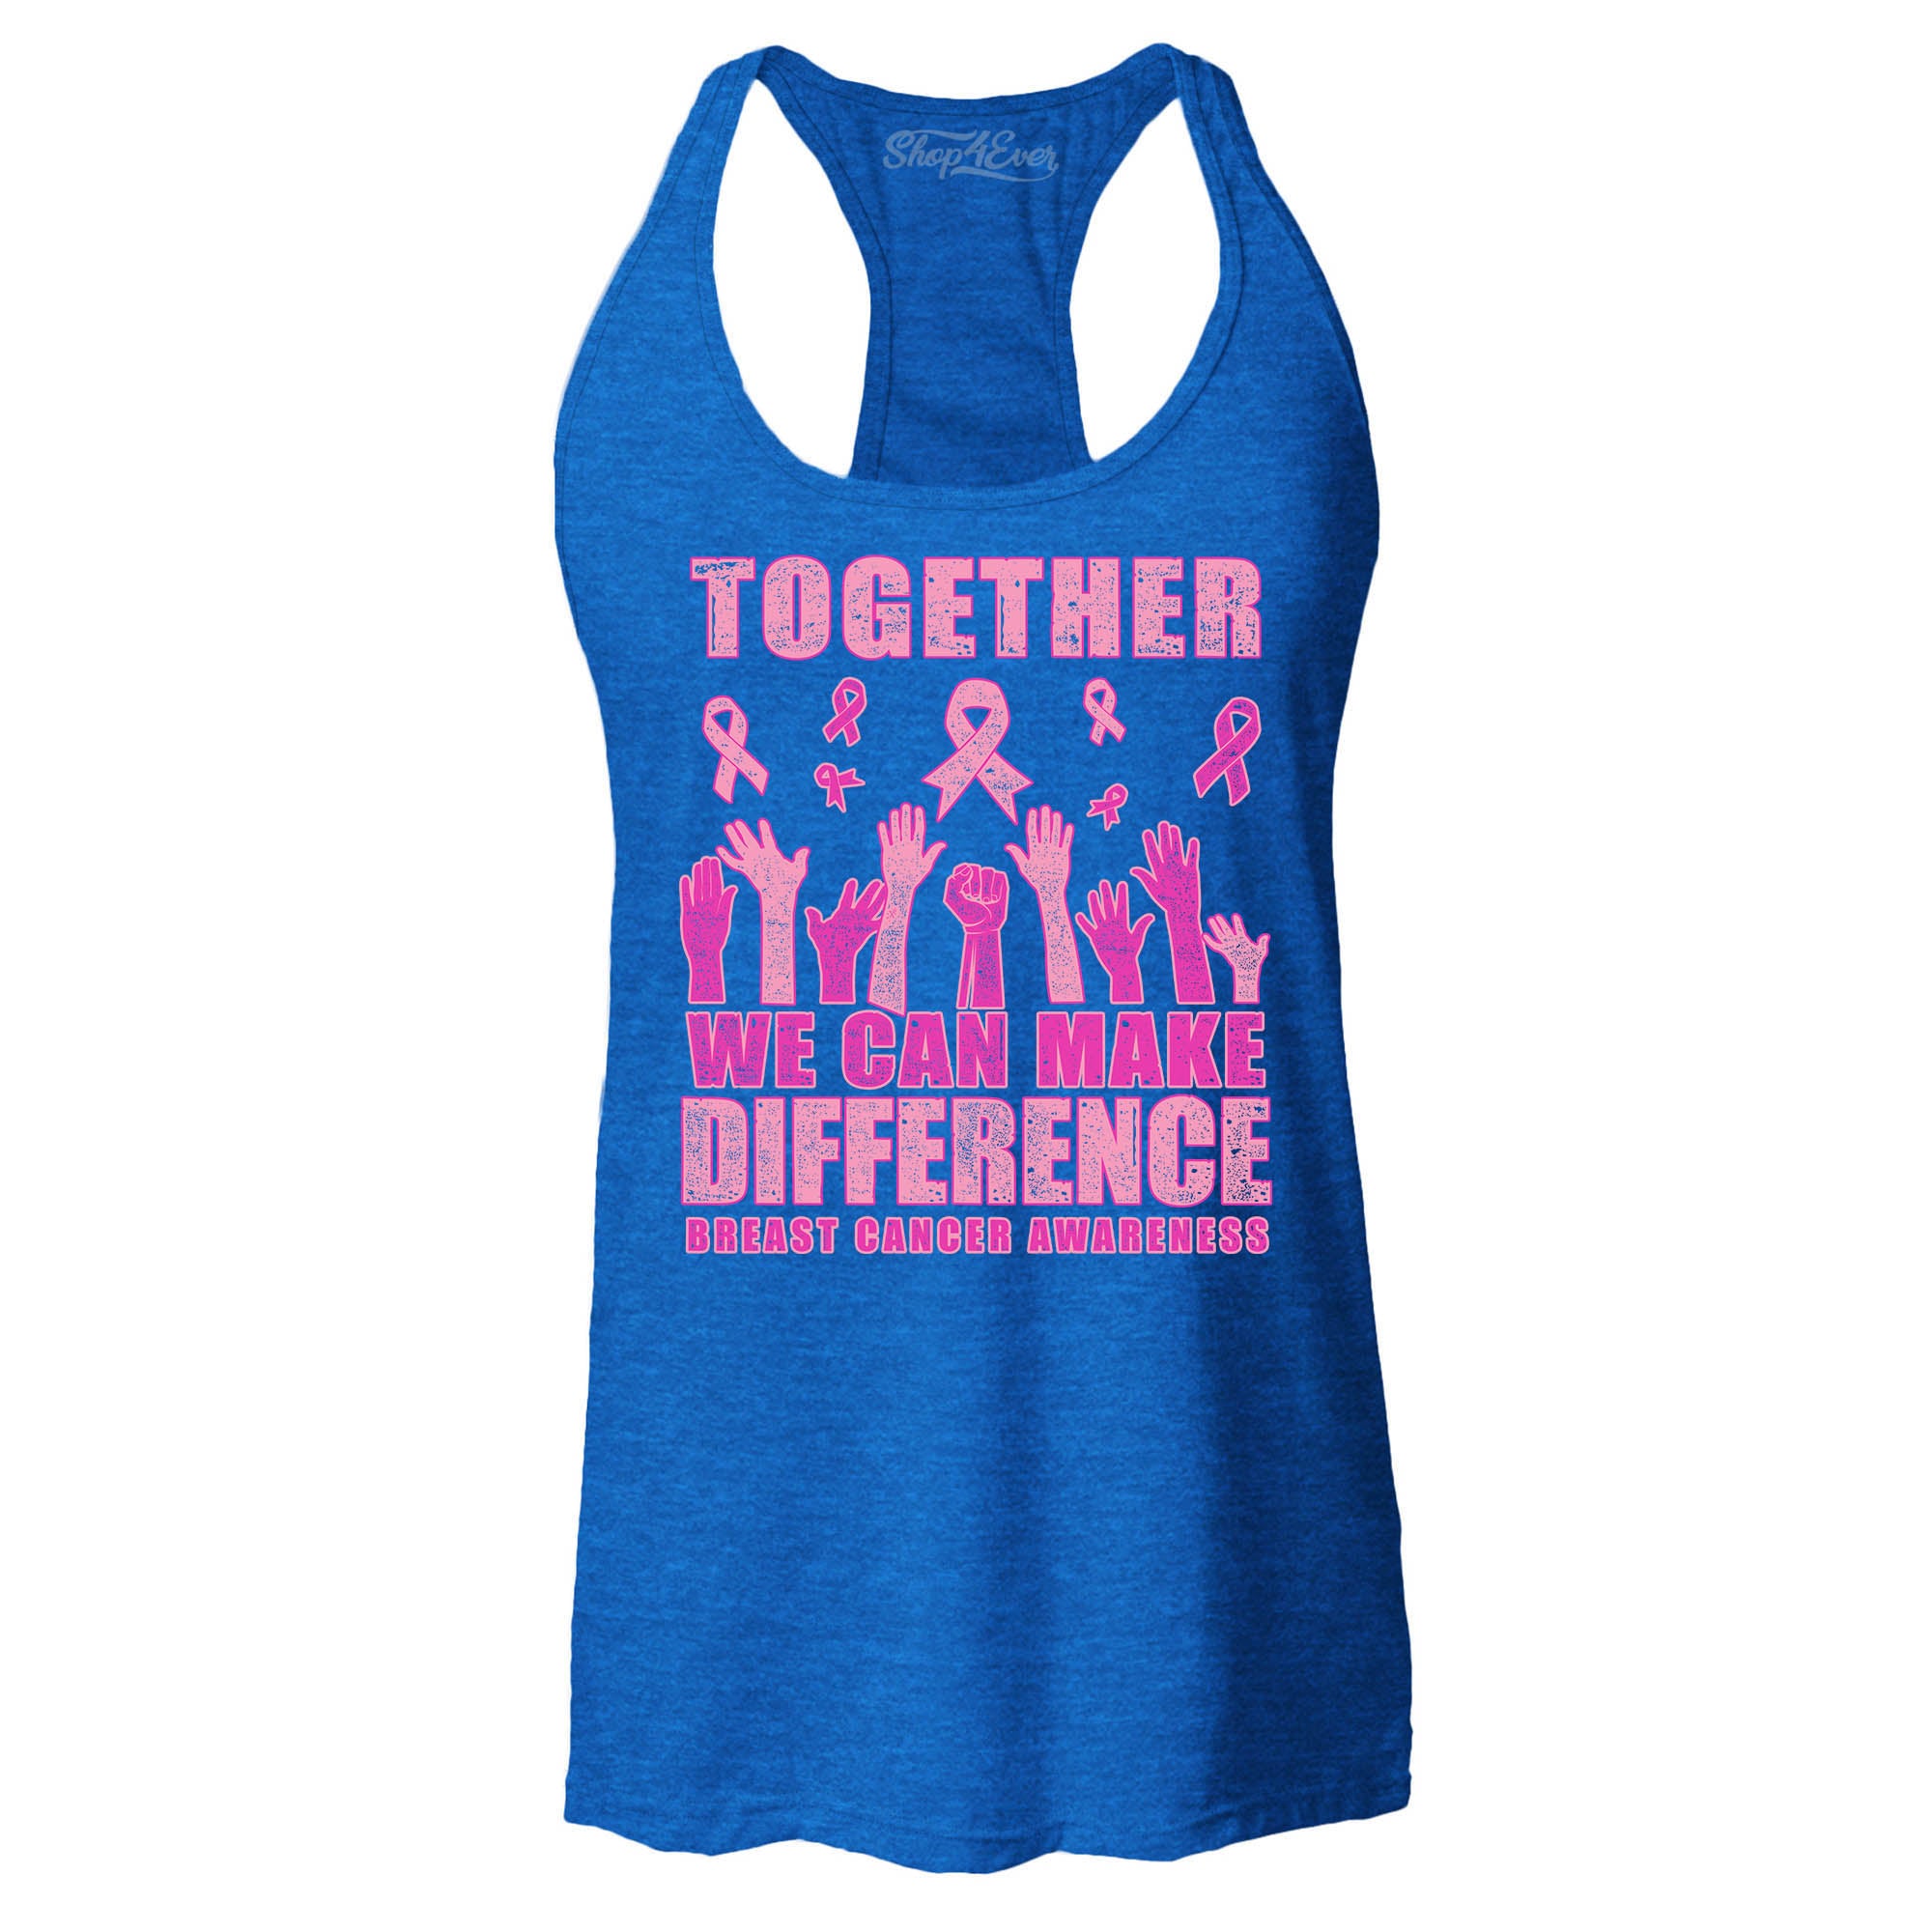 Together We Can Make A Difference Breast Cancer Awareness Women's Racerback Tank Top Slim Fit